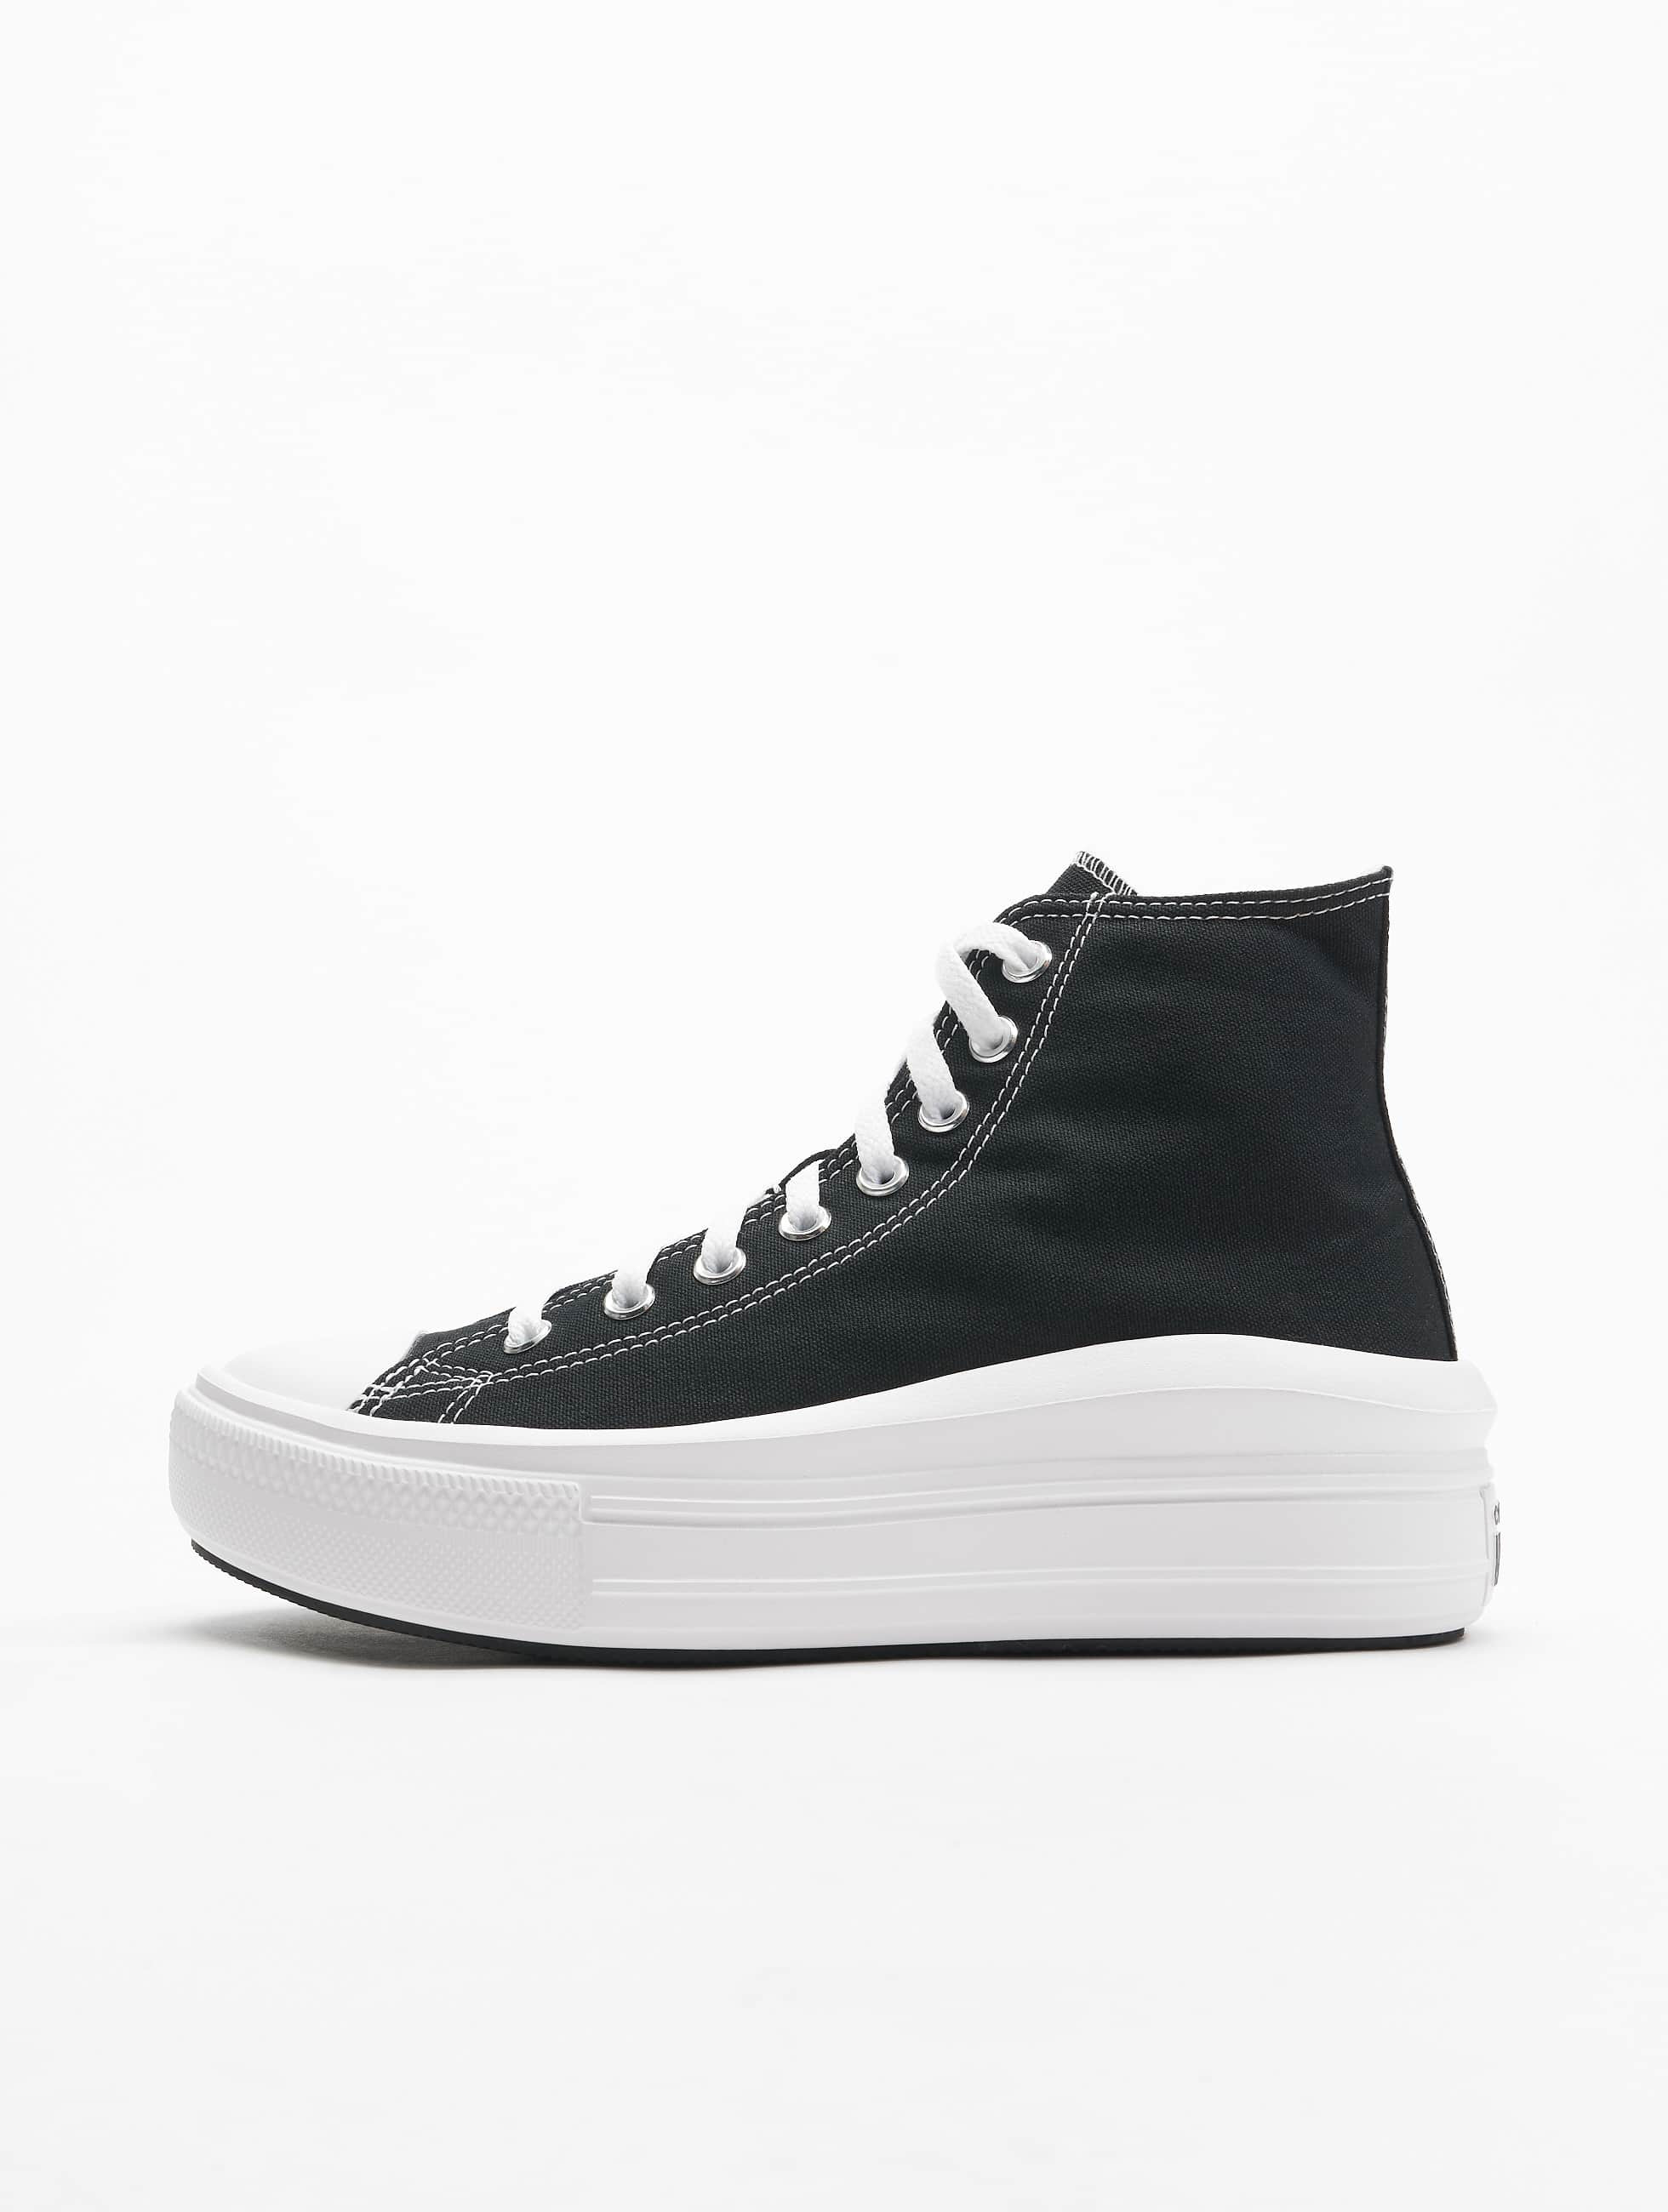 Converse Shoe / Sneakers Chuck Taylor All Stars Move High in black 816002